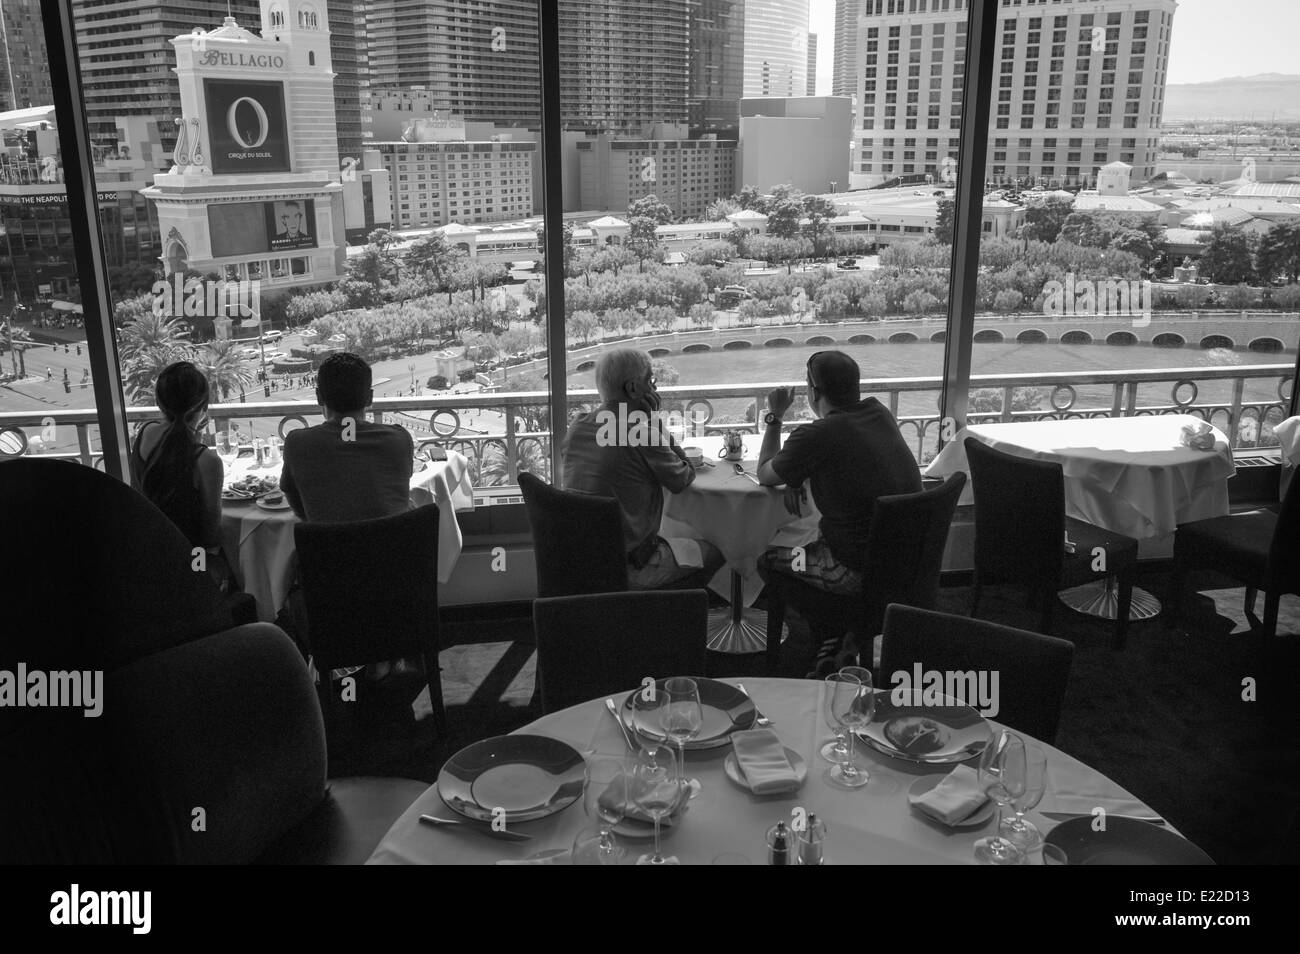 Diners looking at the Bellagio Hotel, Las Vegas, Nevada Stock Photo